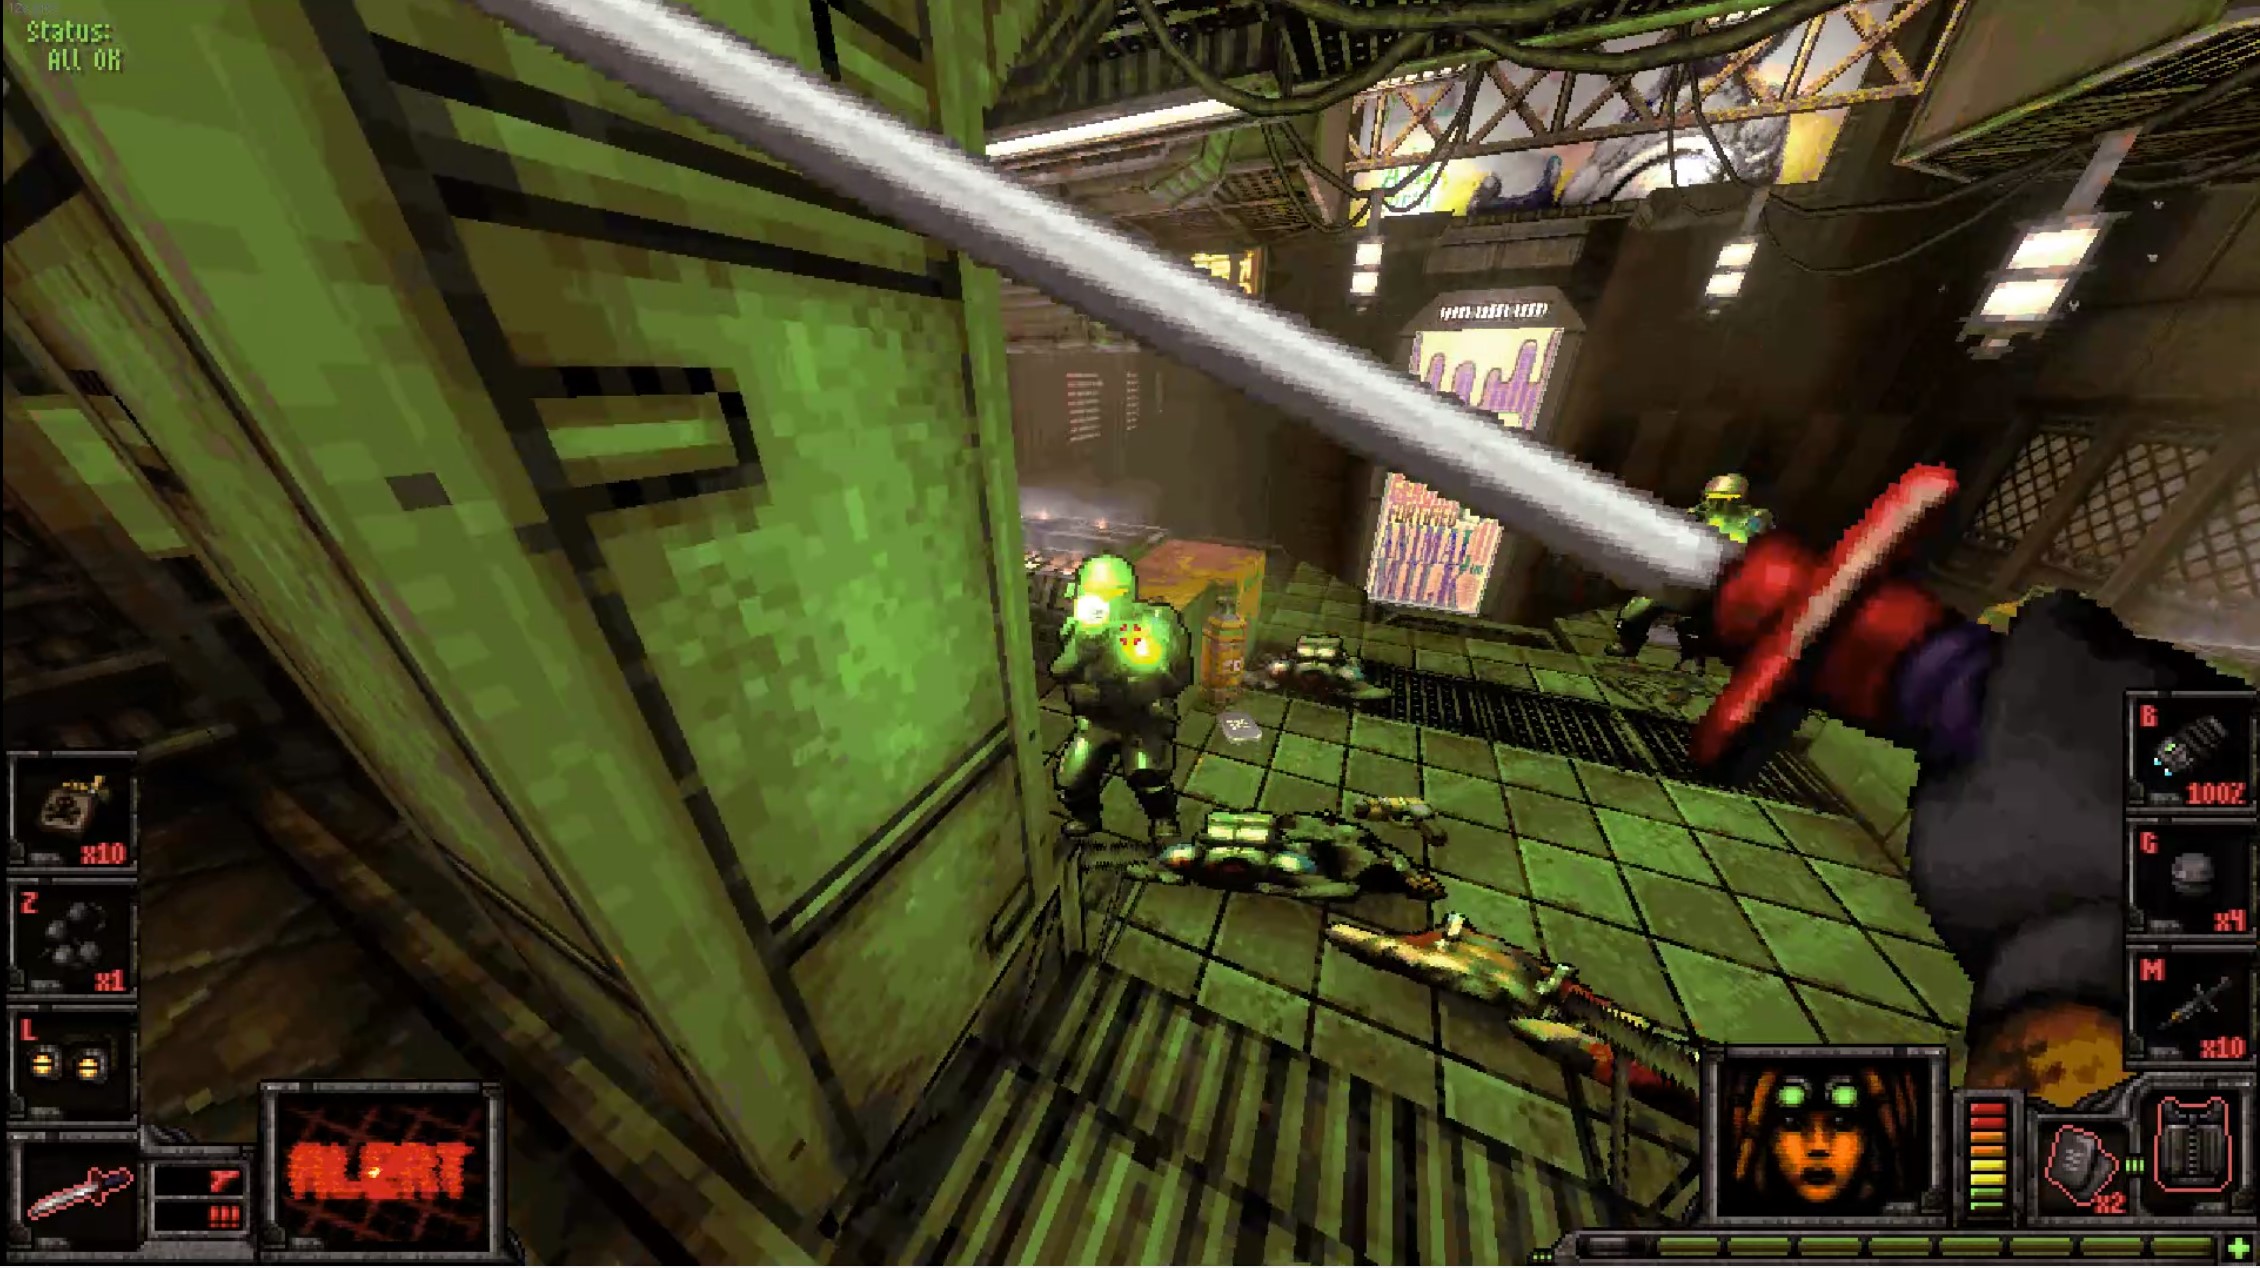 This throwback sci-fi FPS is like the Jedi Knight 4 we never got